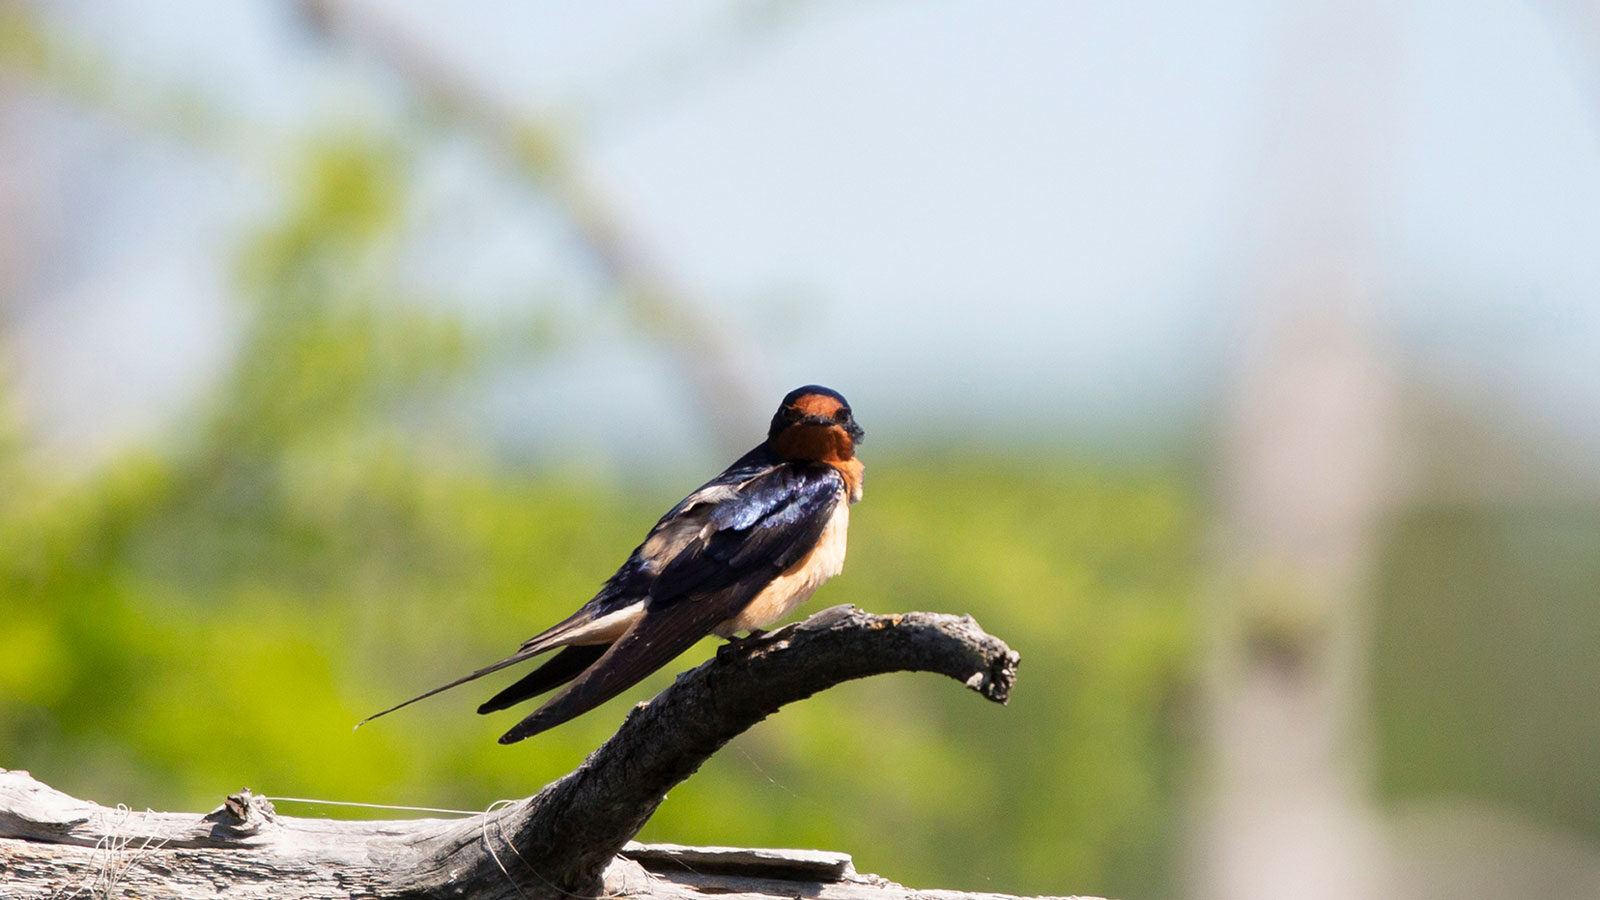 Adult barn swallow looking out from its perch on a tree